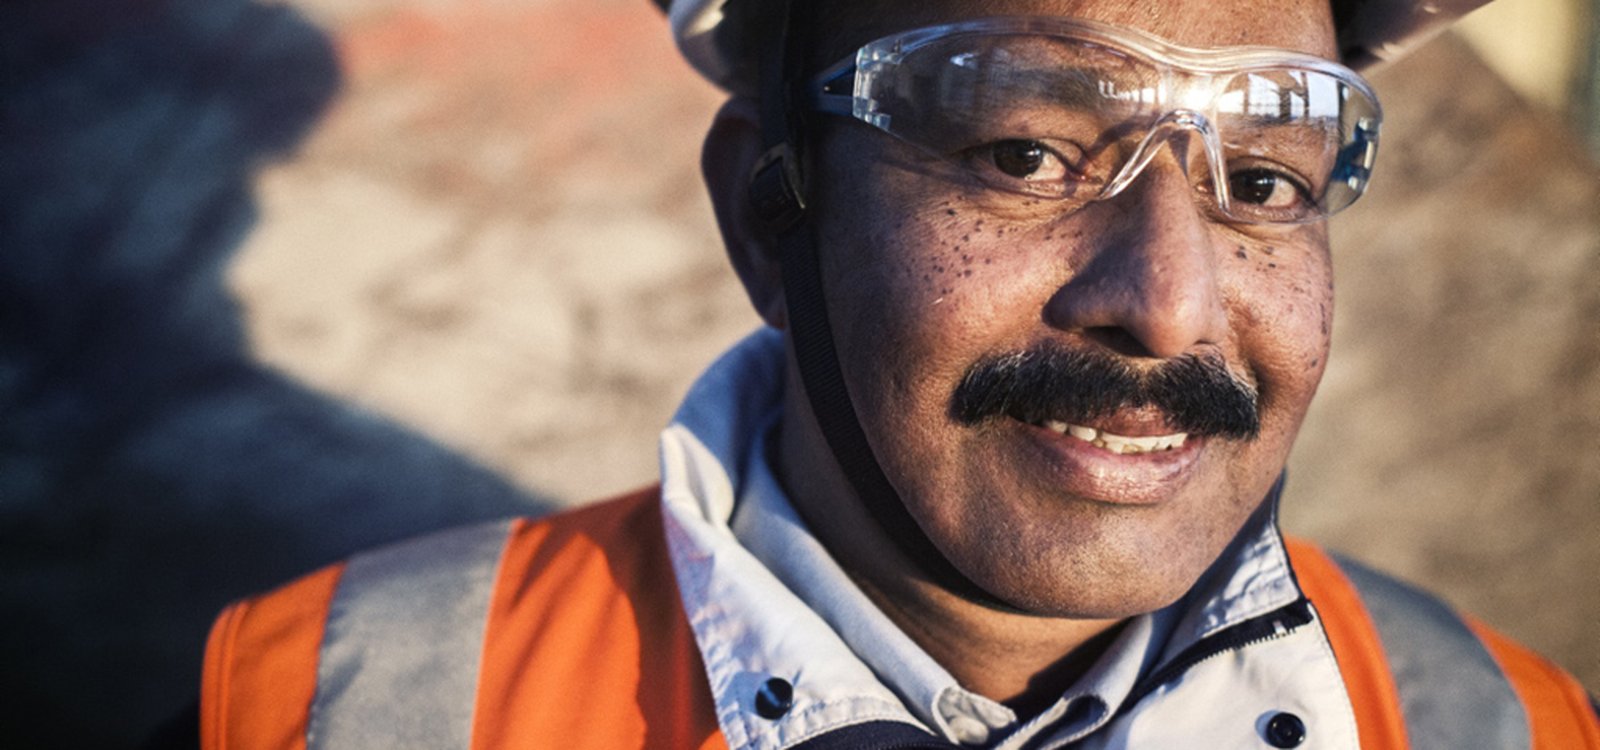 Sudhakar Kalwapalli, Sandvik general EHS manager, points out that safety is a core value to Sandvik.